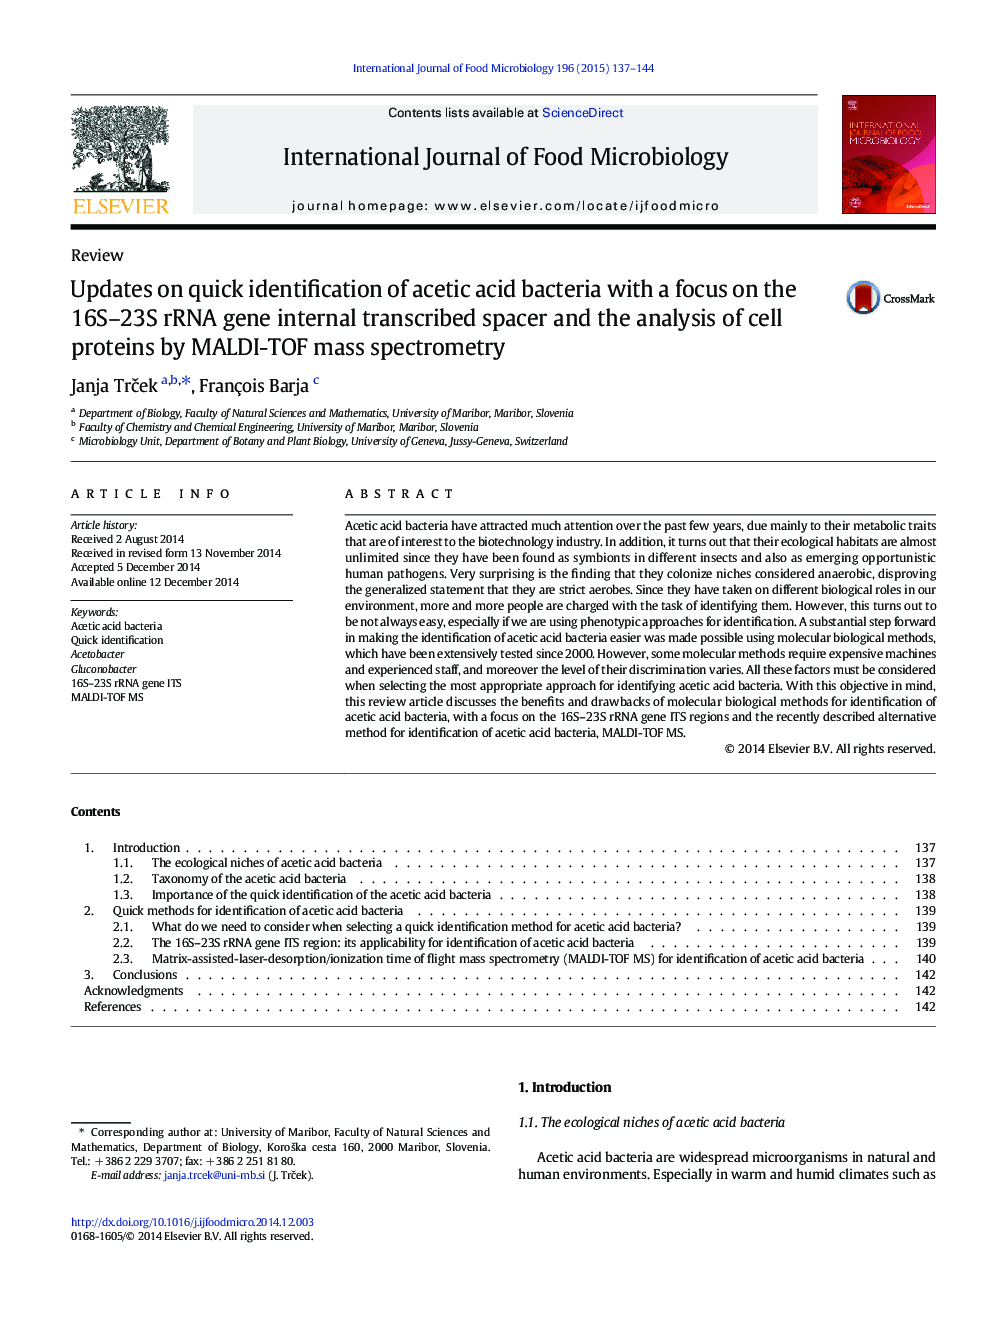 Updates on quick identification of acetic acid bacteria with a focus on the 16S–23S rRNA gene internal transcribed spacer and the analysis of cell proteins by MALDI-TOF mass spectrometry